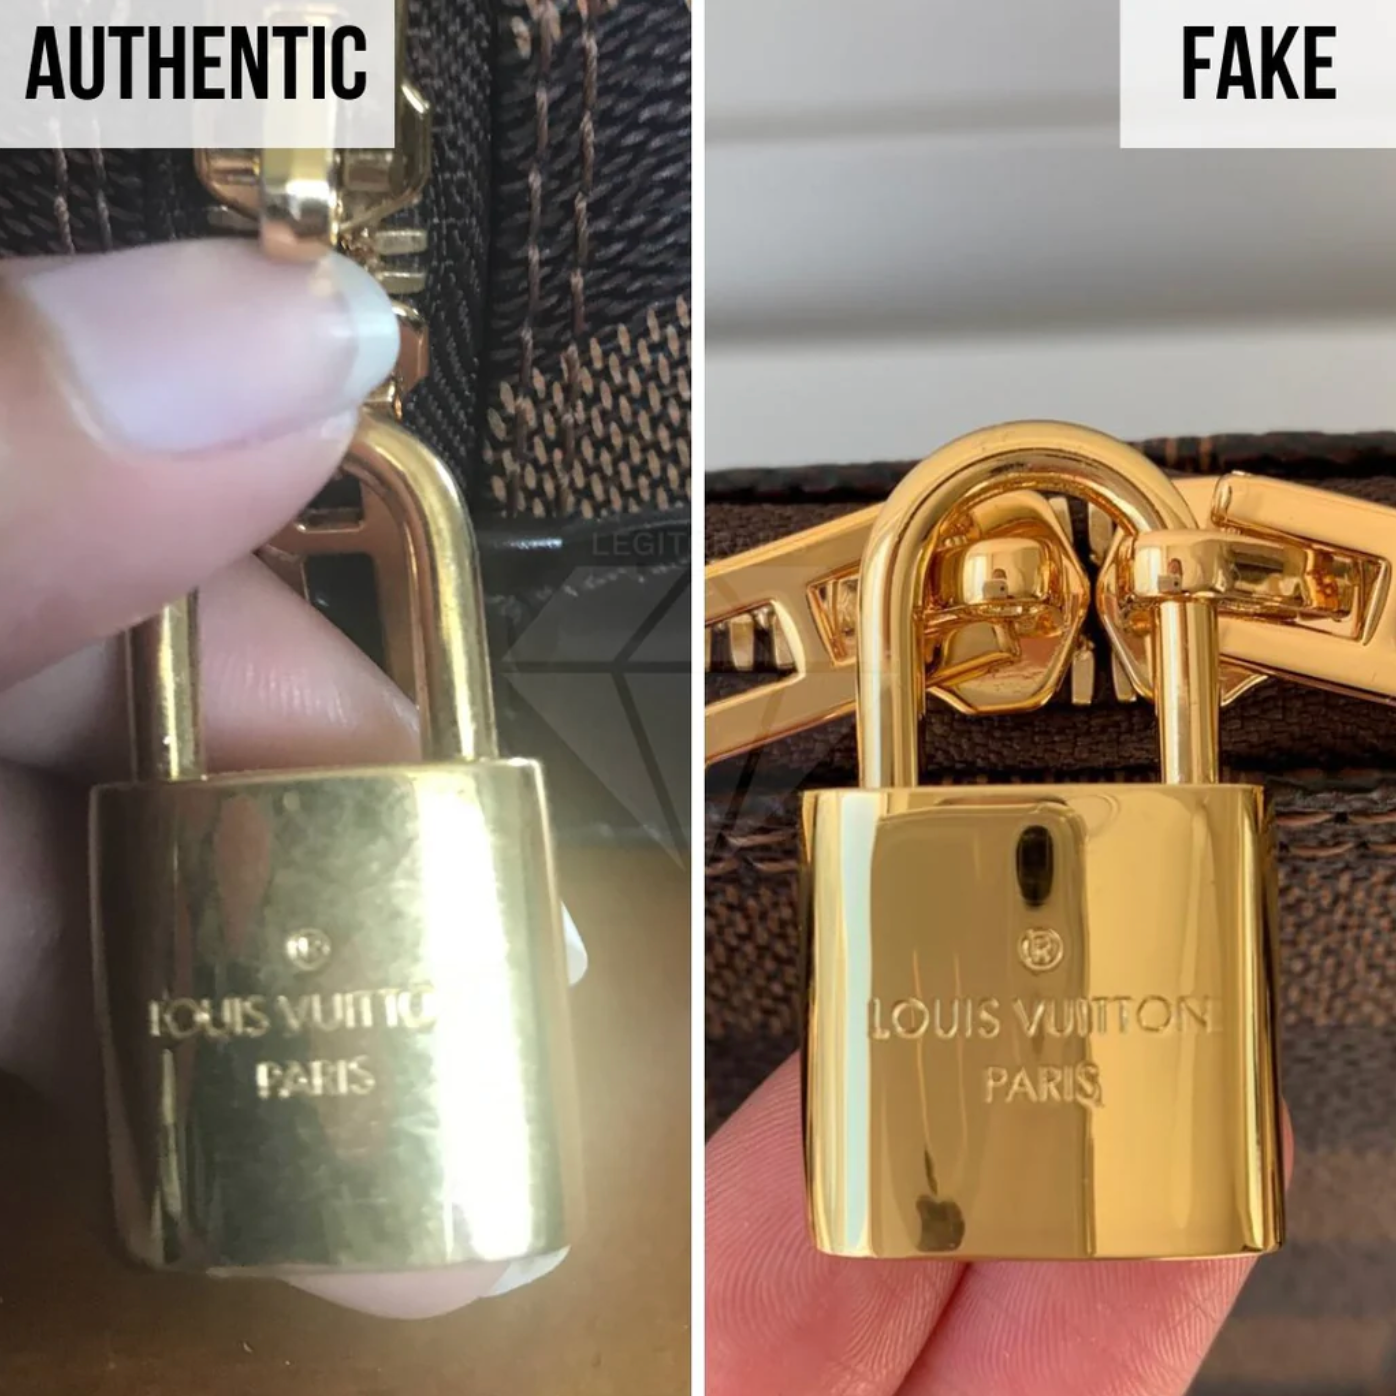 Fake vs Real LV  How to spot a fake Louis Vuitton Neverfull bag  YouTube